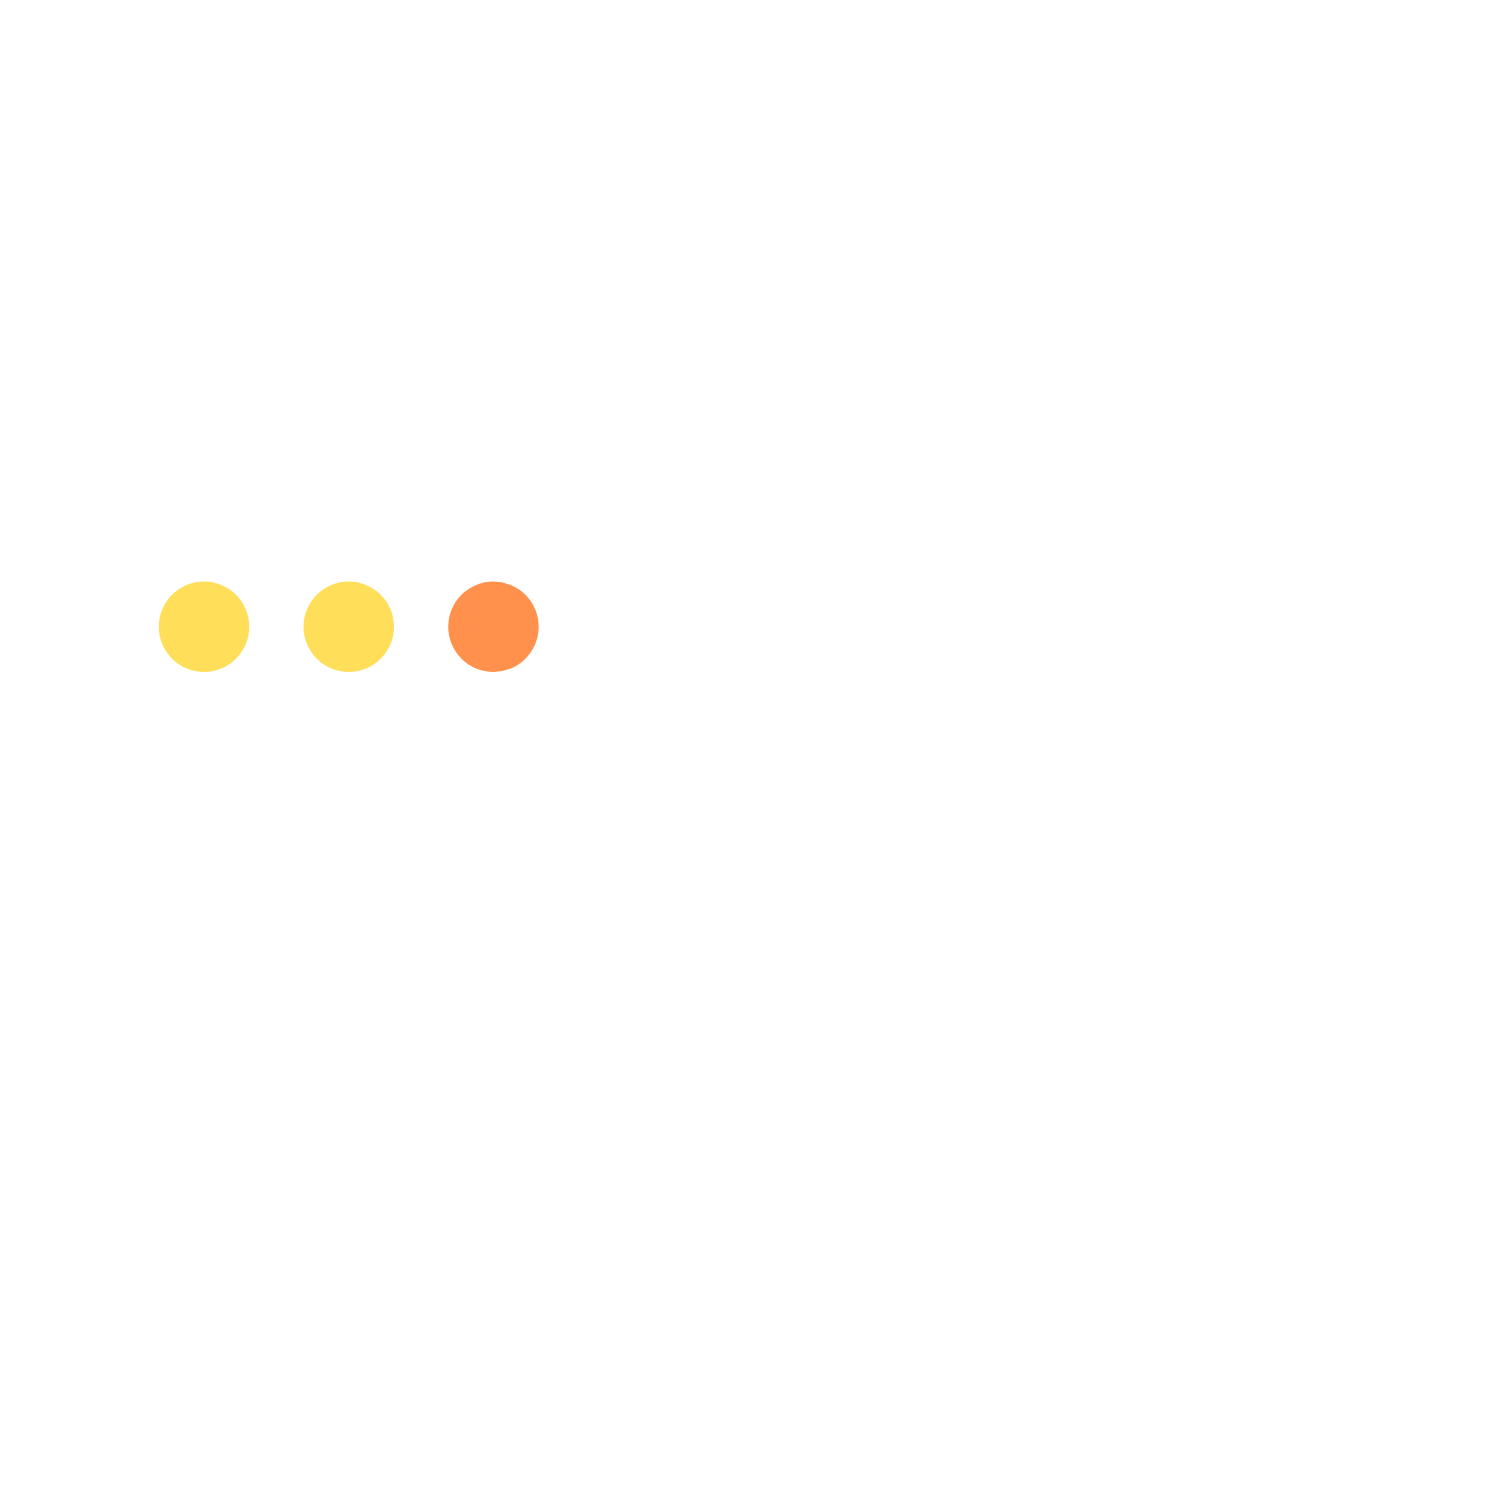 The Ortho Course